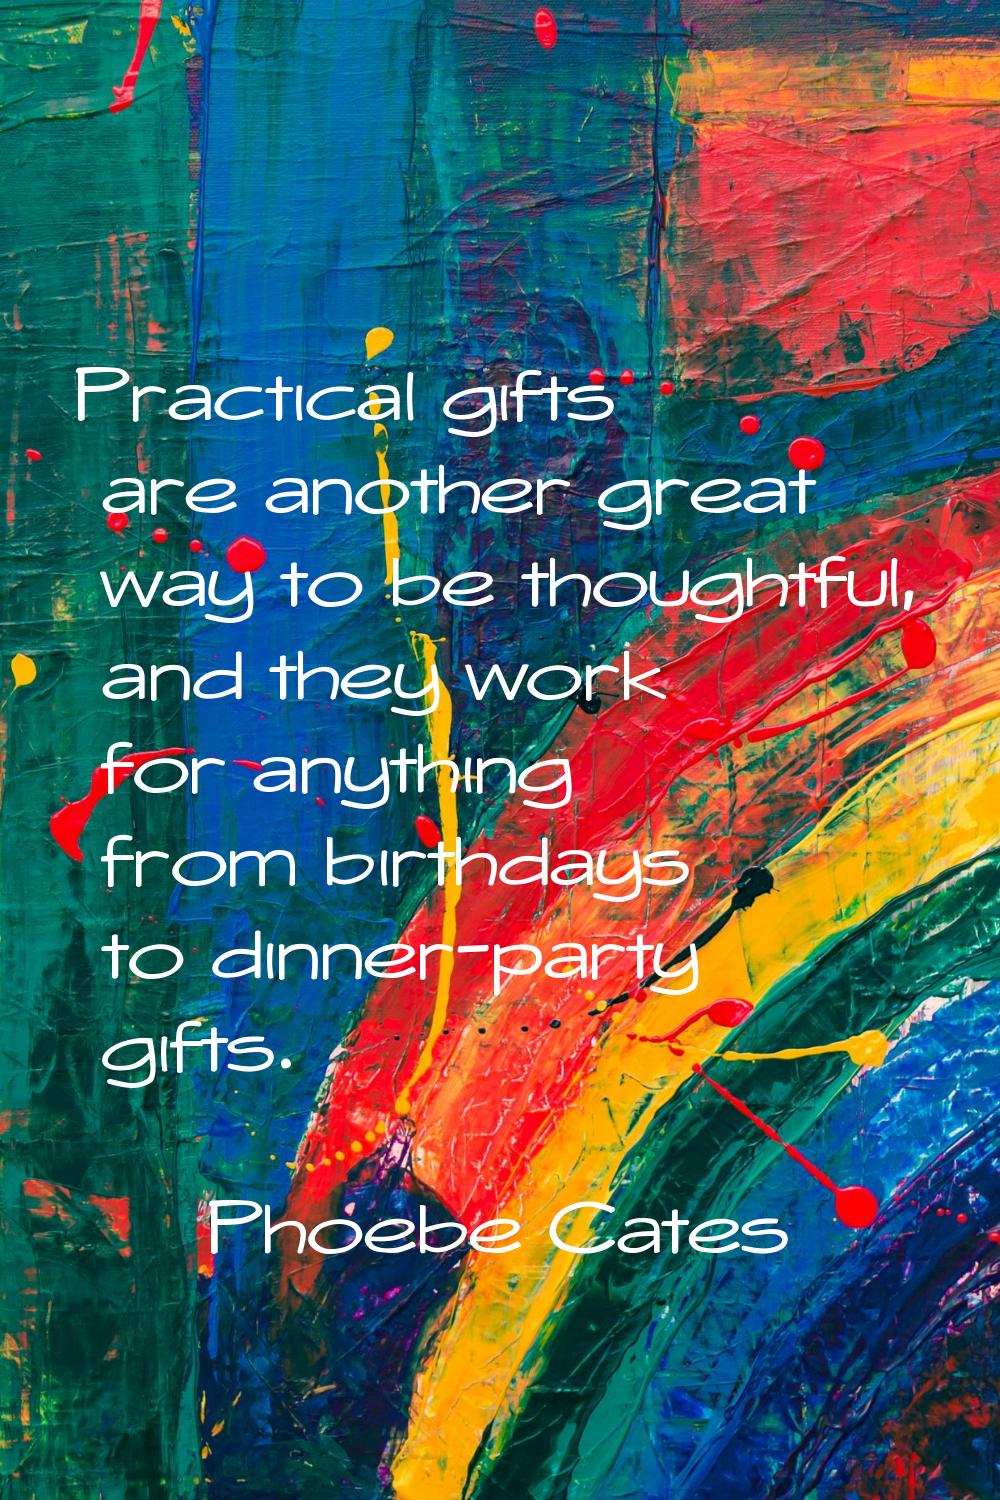 Practical gifts are another great way to be thoughtful, and they work for anything from birthdays t